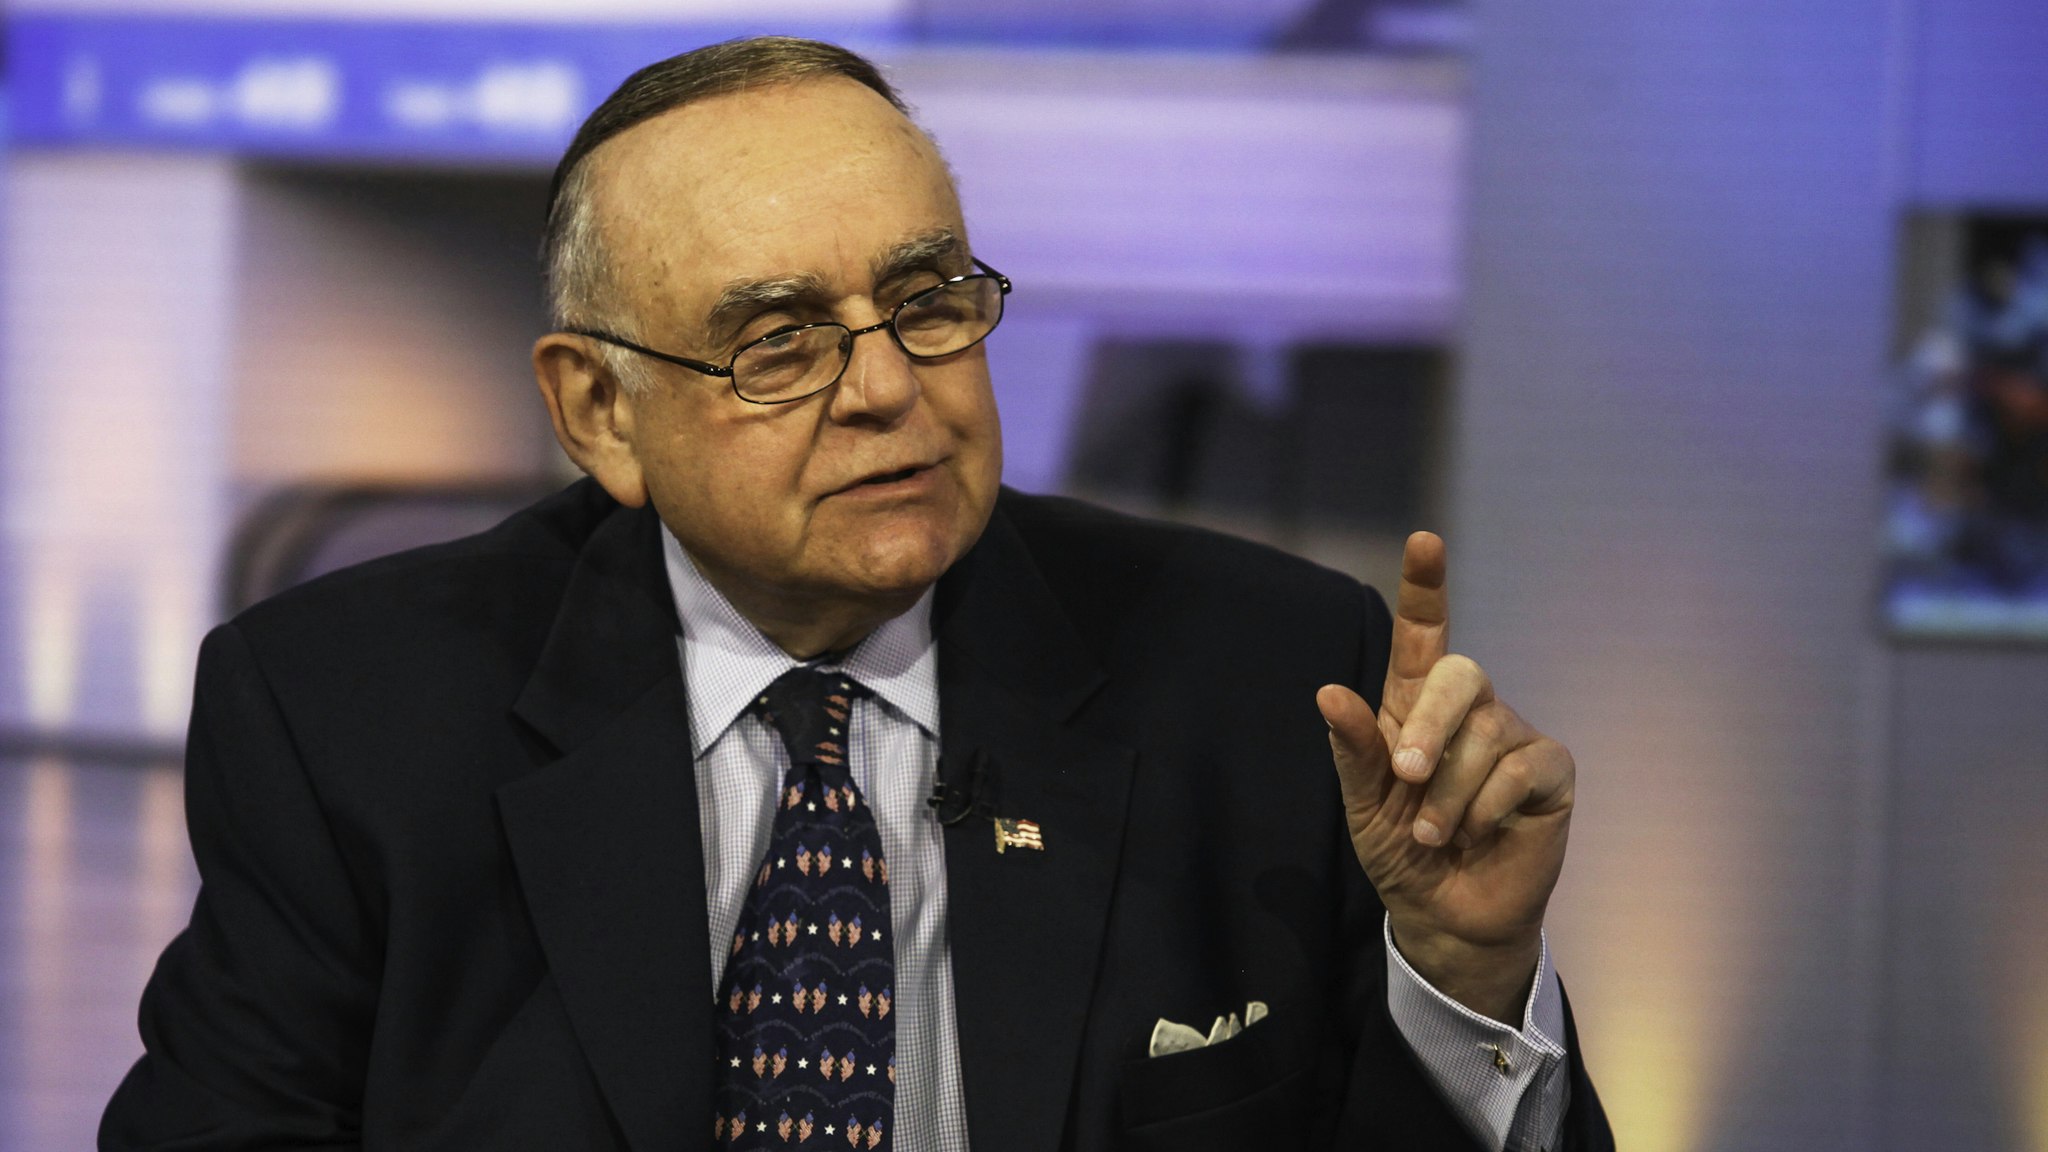 Leon Cooperman, chairman and chief executive officer of Omega Advisors Inc., speaks during a Bloomberg Television interview in New York, U.S., on Tuesday, Oct. 13, 2015. Cooperman said the U.S. Securities and Exchange Commission needs to address market structure problems caused by super-fast computers.